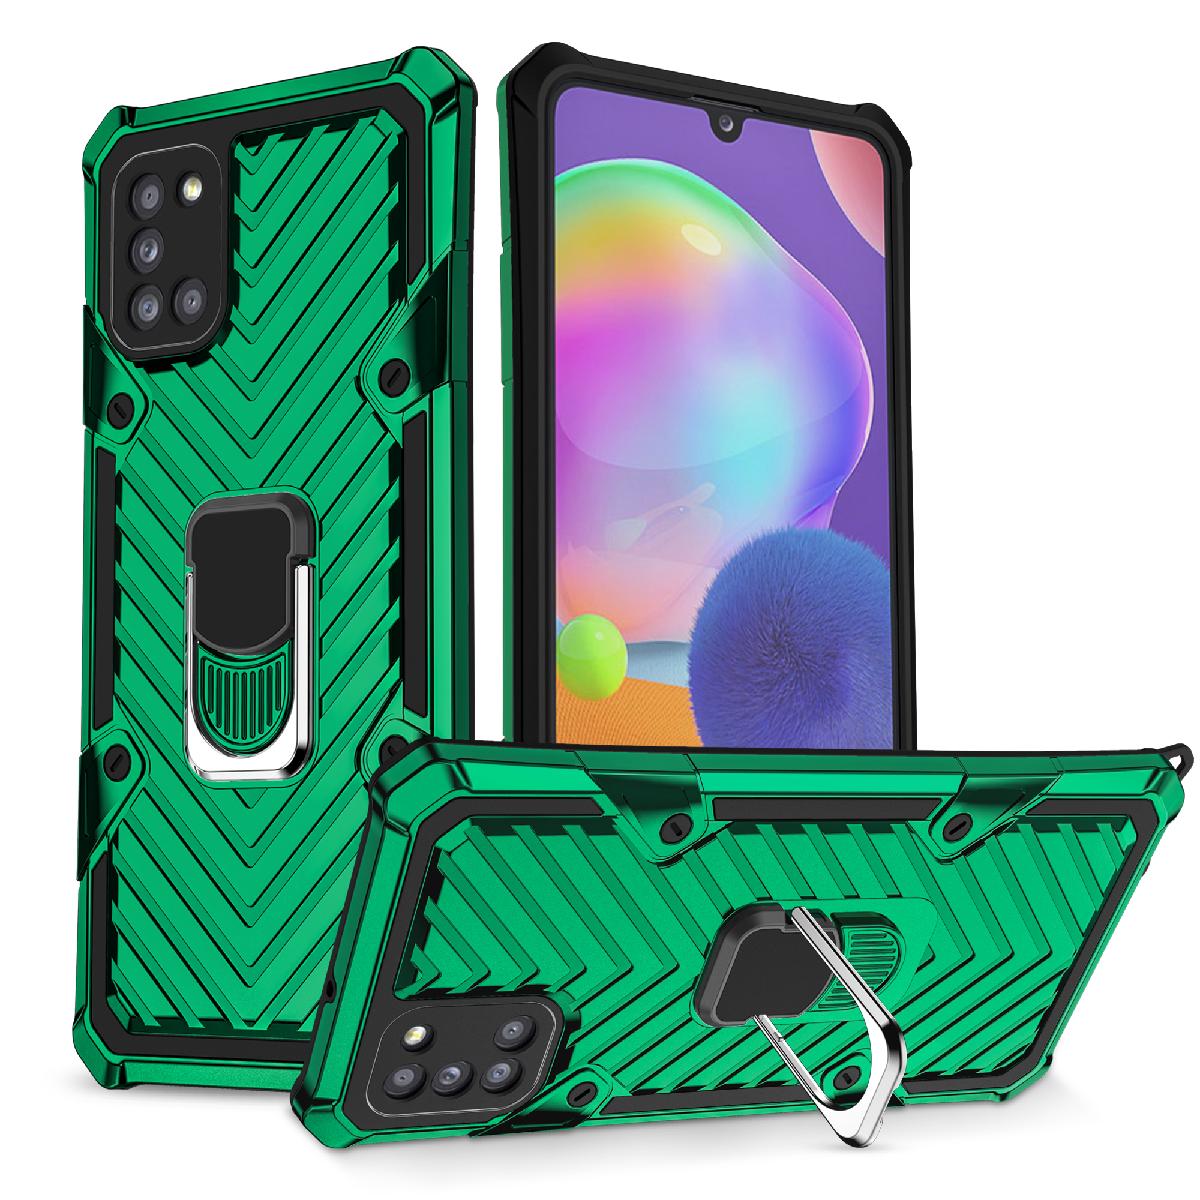 Reiko Kickstand Anti-Shock And Anti Falling Case for SAMSUNG GALAXY A31 In Green